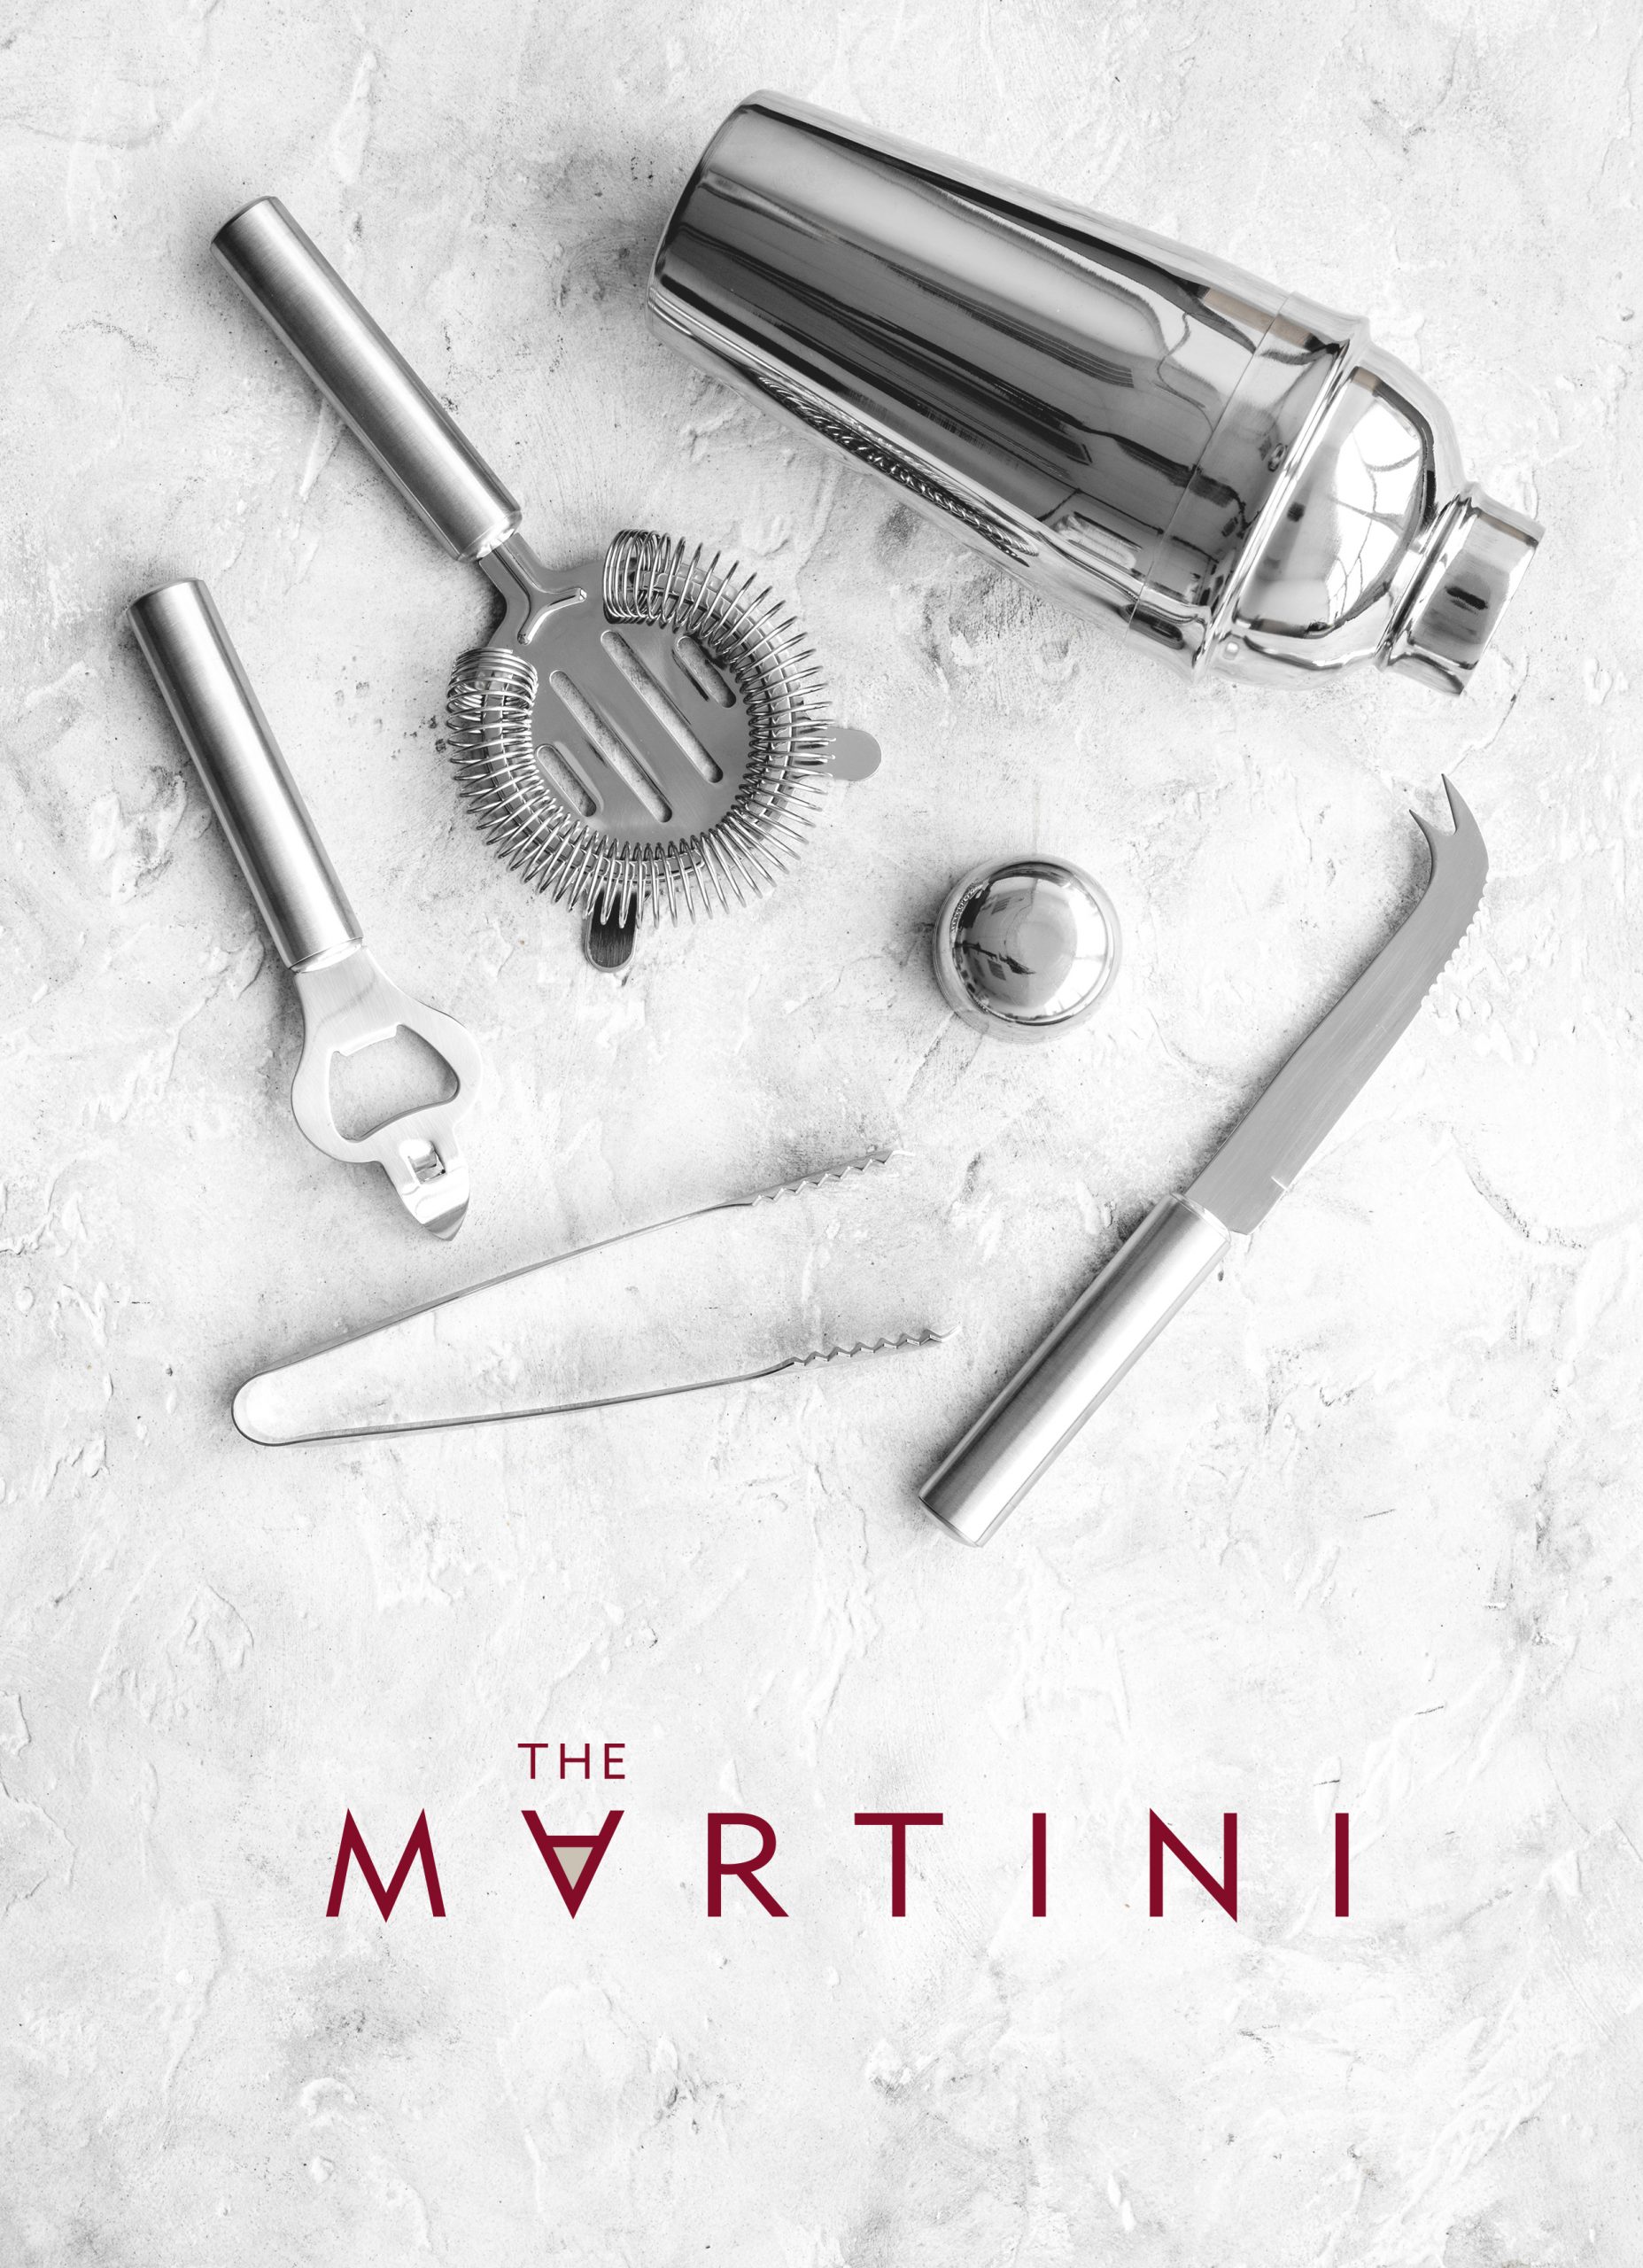 The Martini logo placed over an image of cocktail-making equipment on a marble countertop.